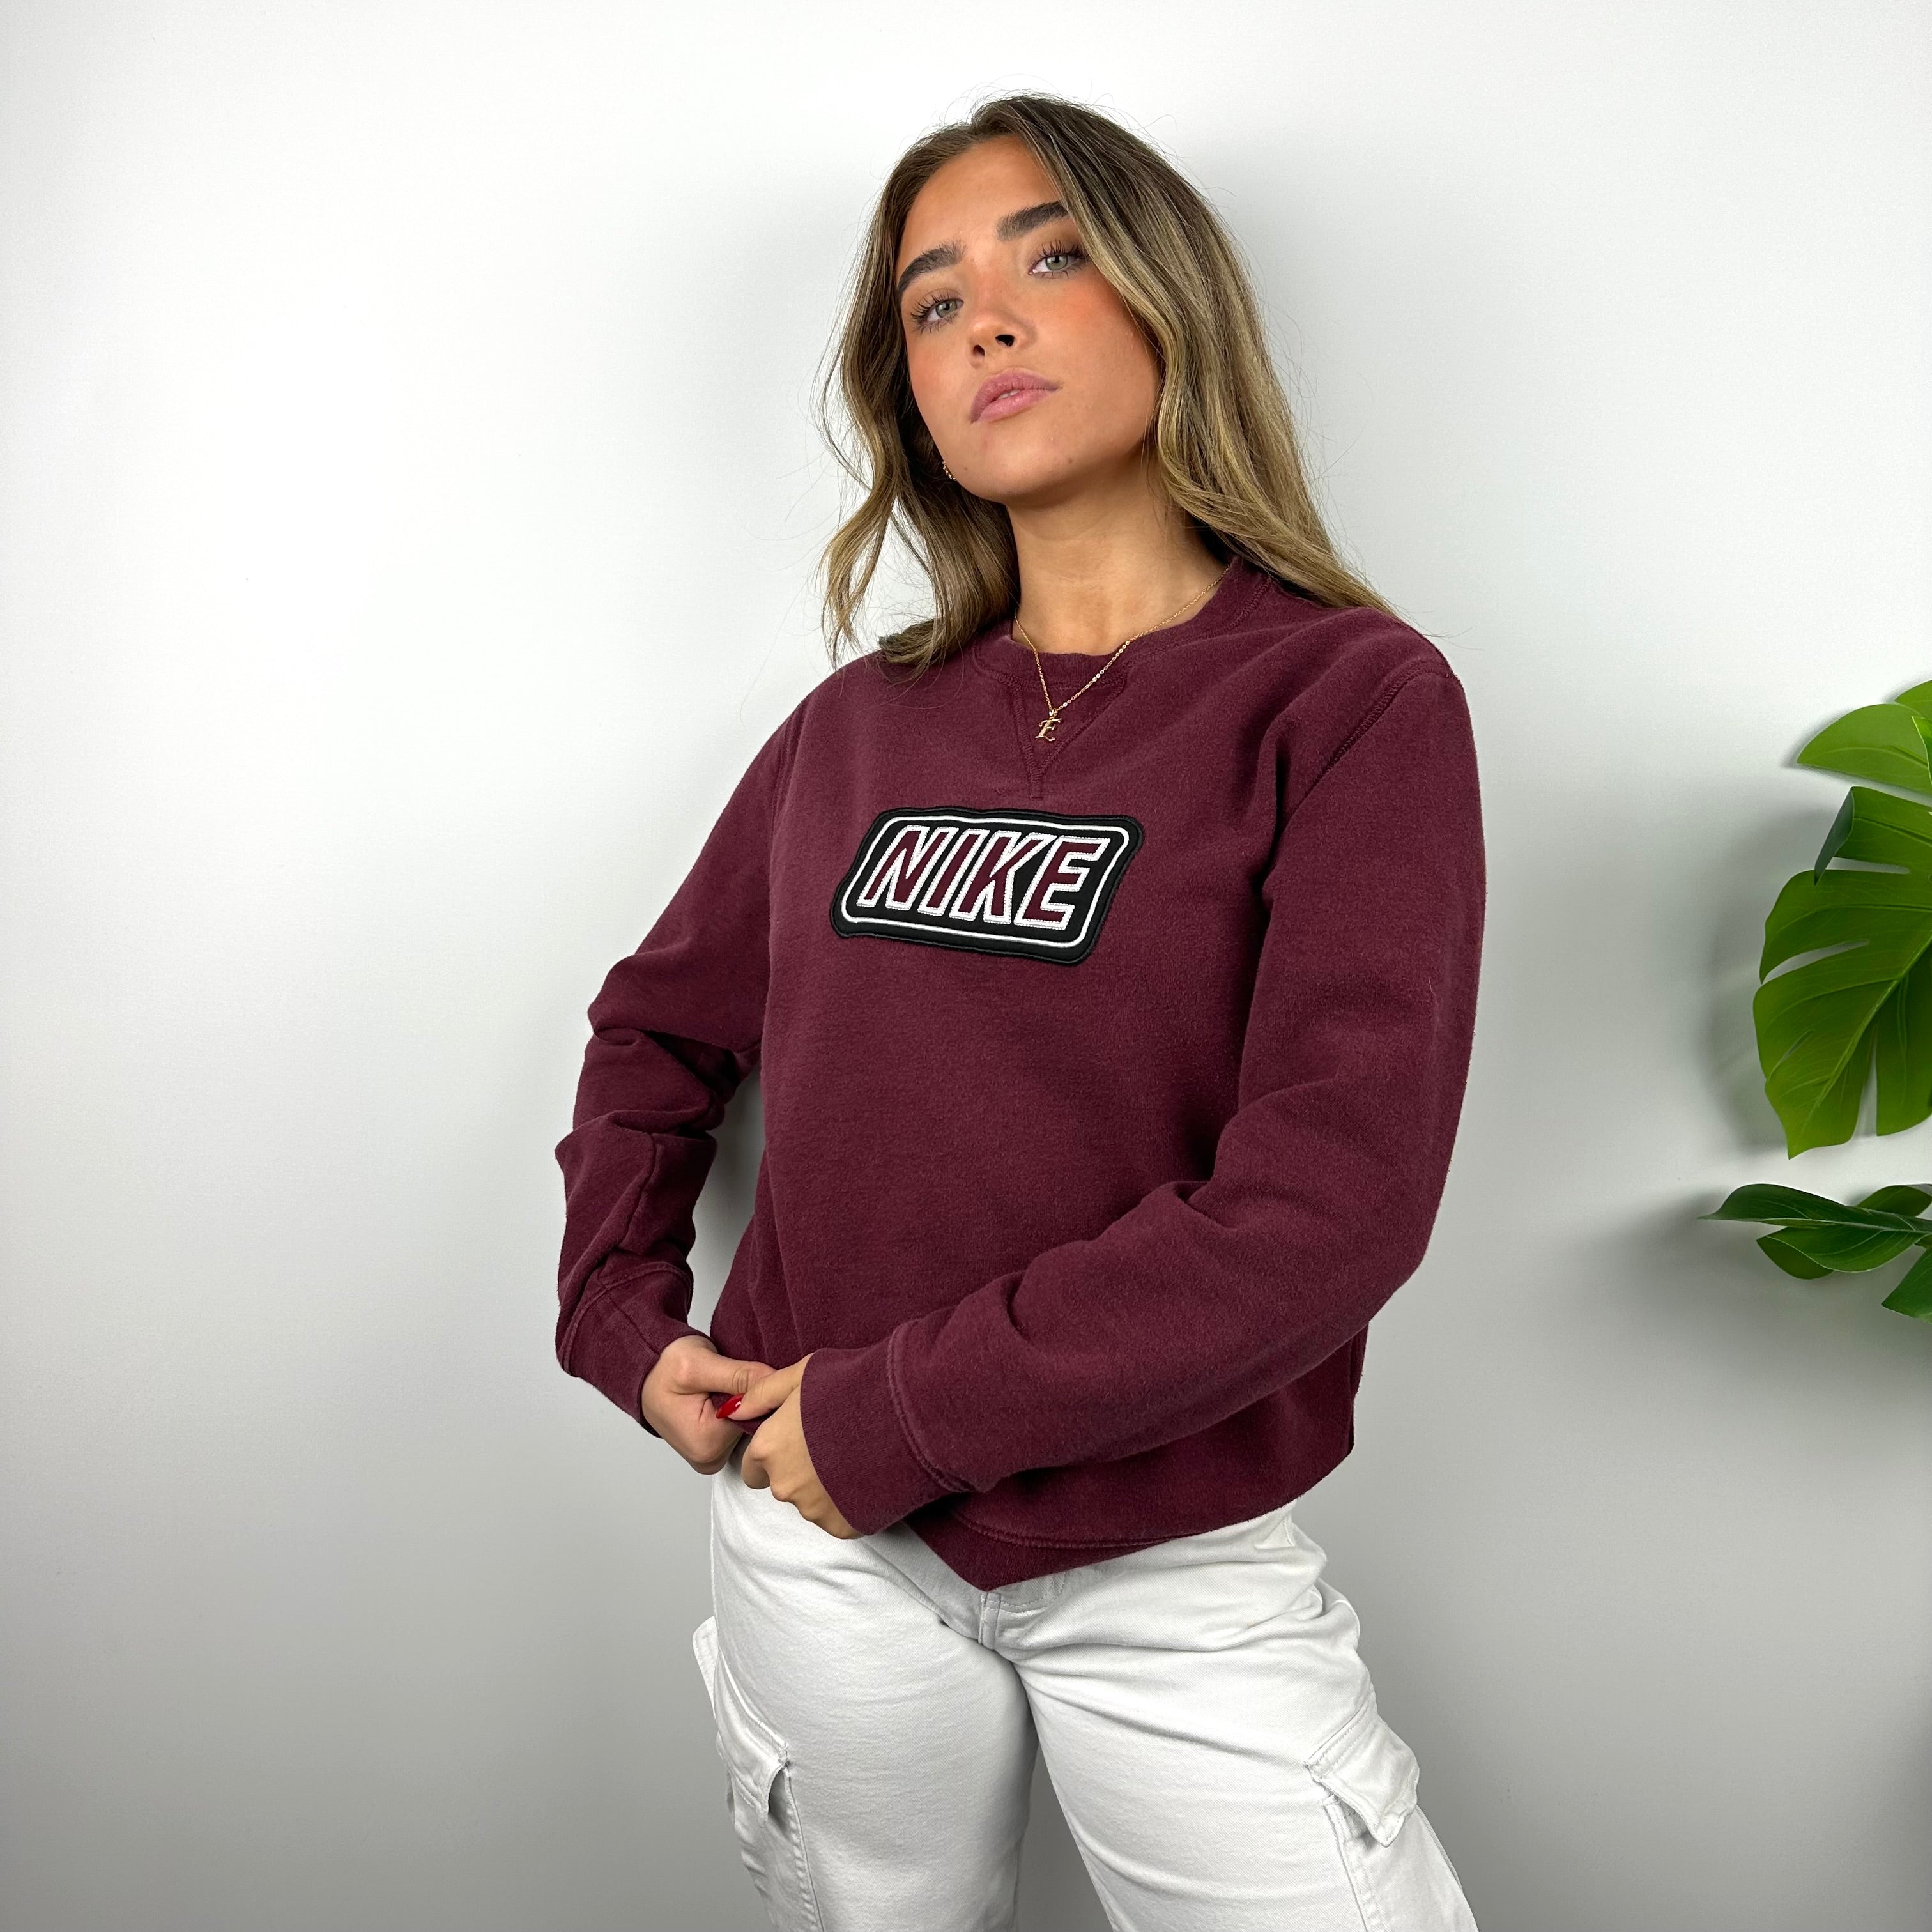 Nike Maroon Embroidered Spell Out Sweatshirt (M)